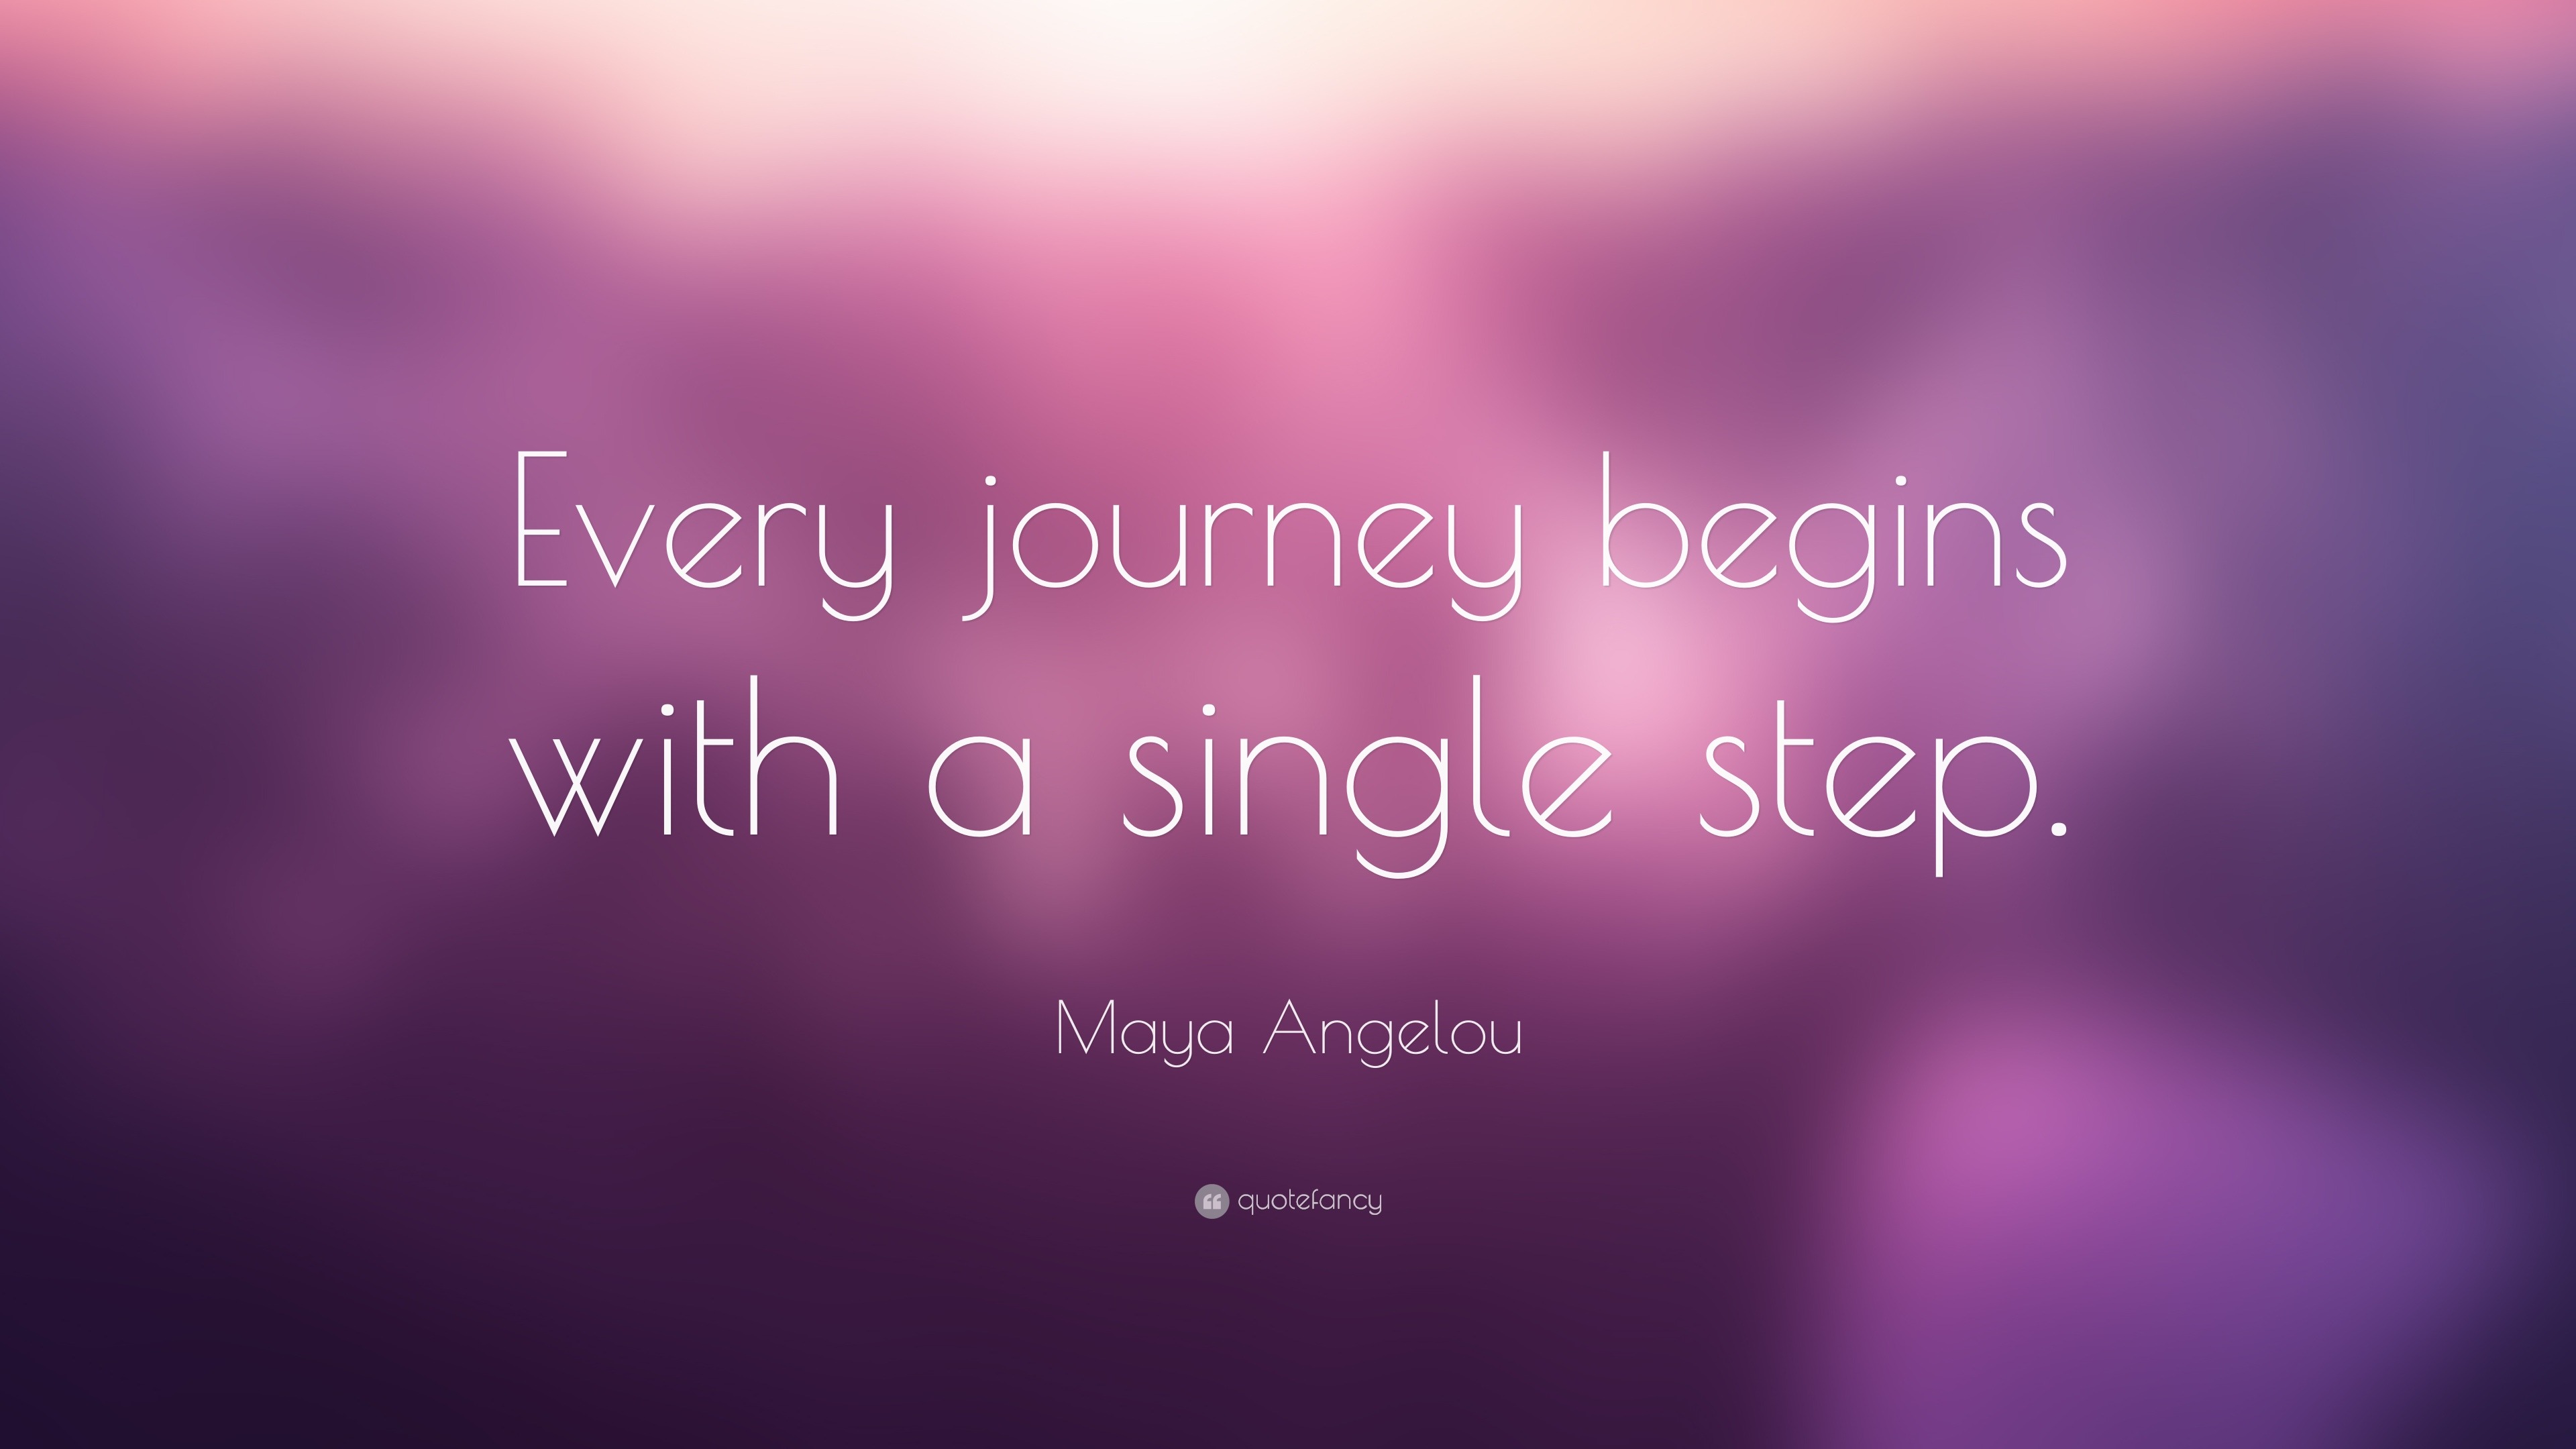 Maya Angelou Quote: “Every journey begins with a single step.”